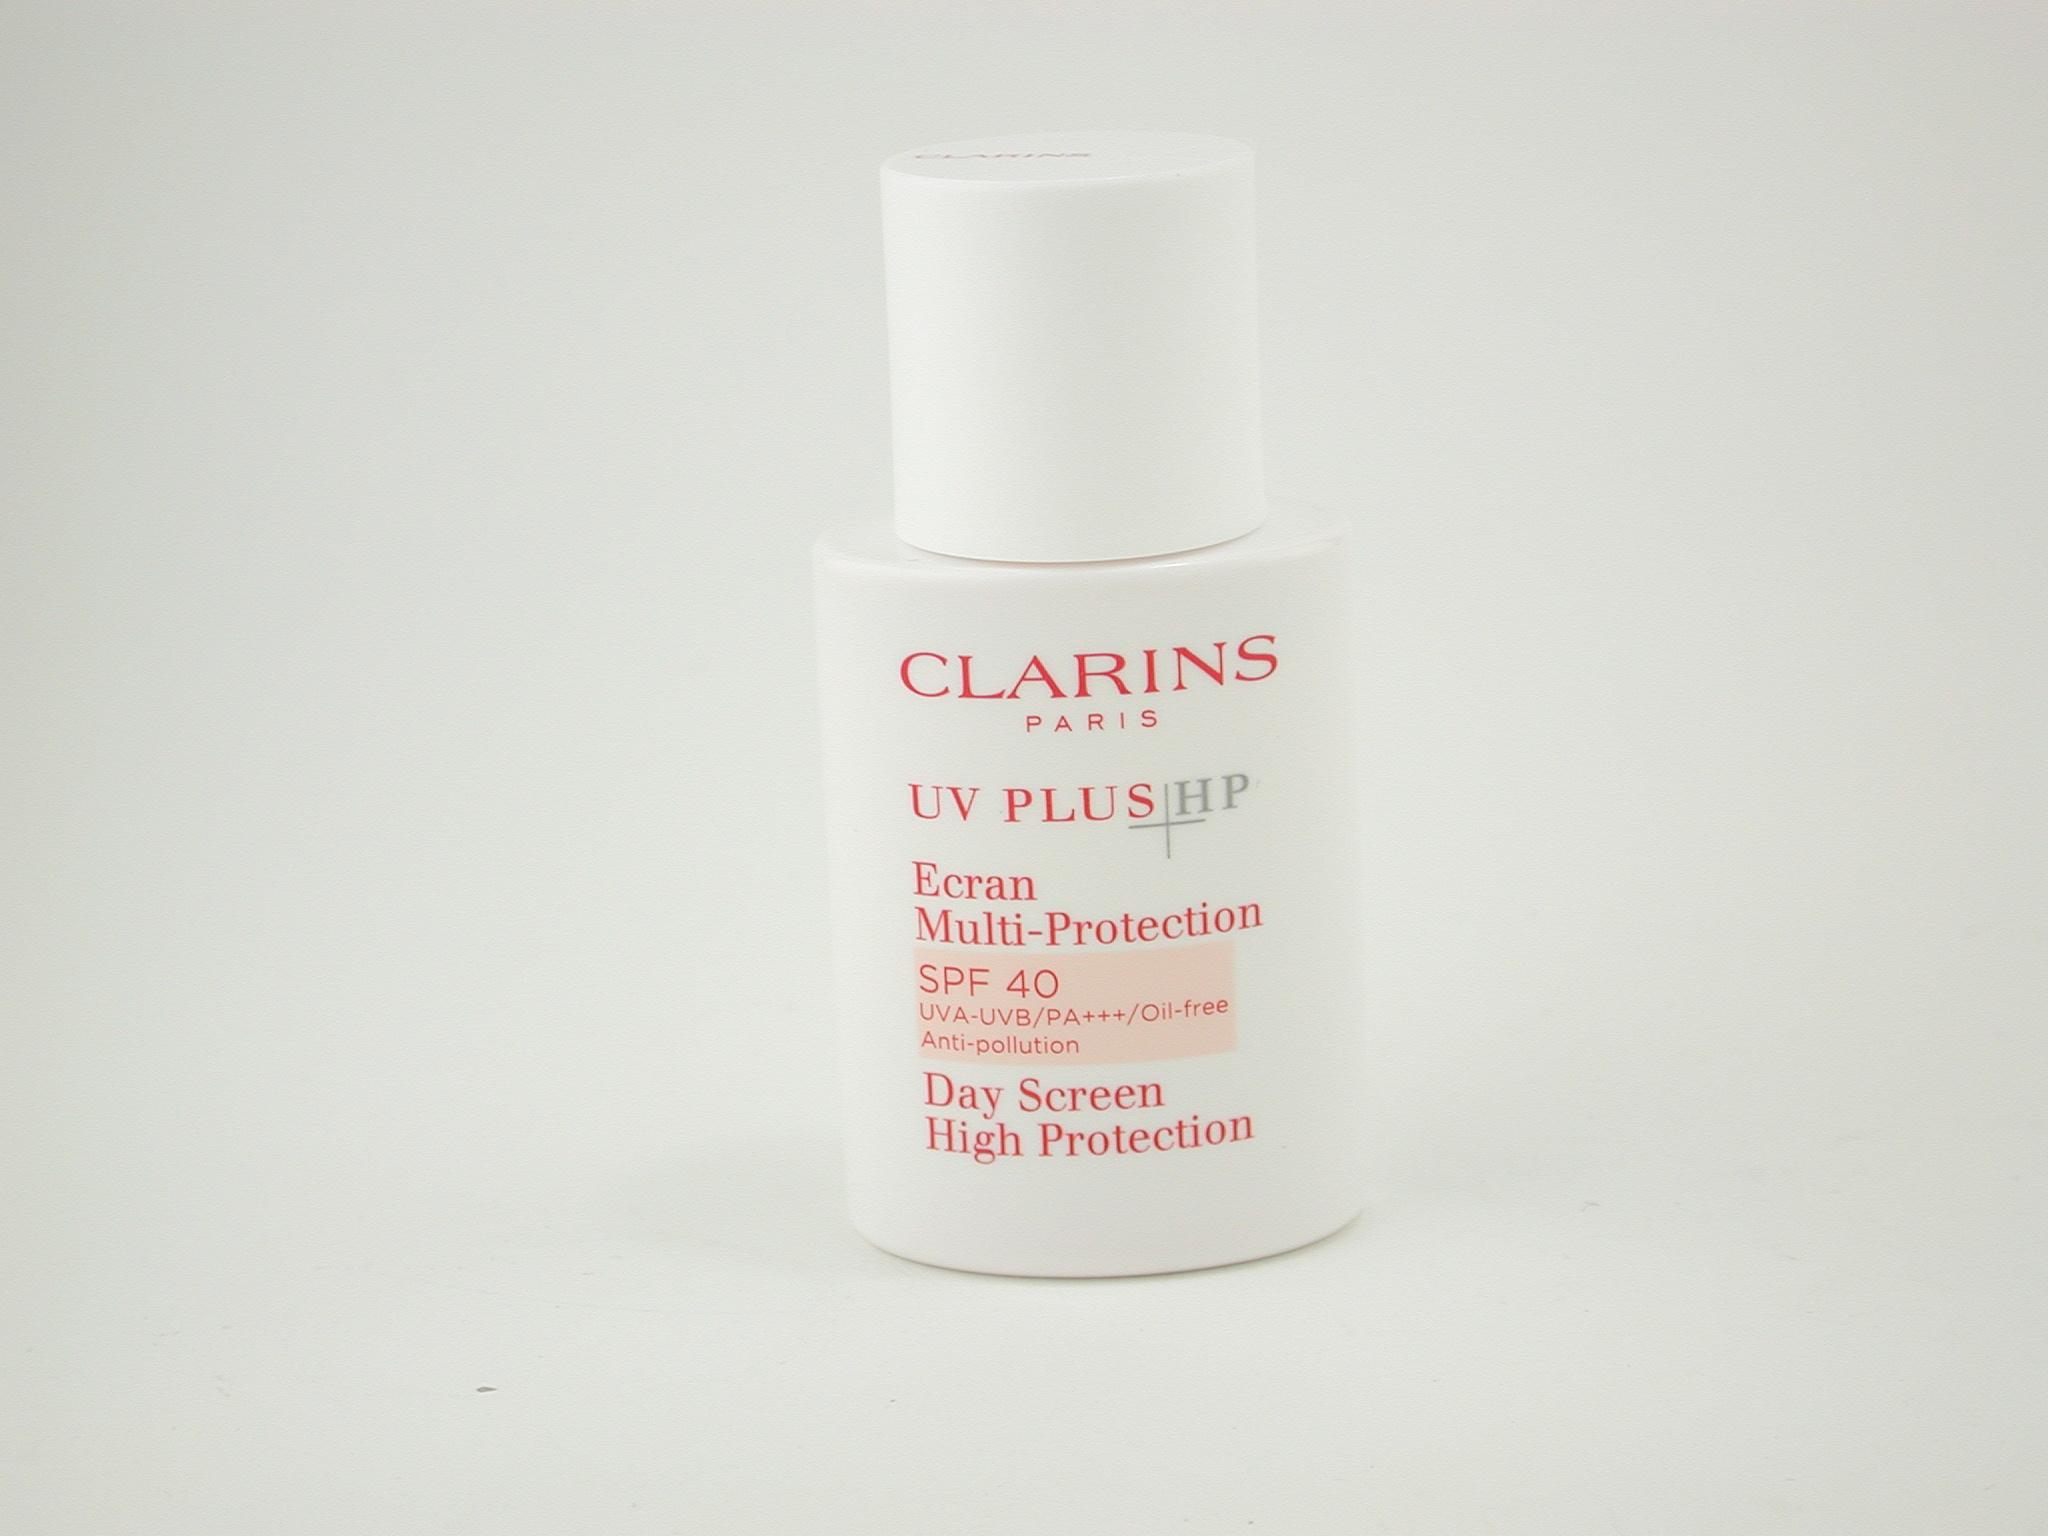 UV Plus Day Screen High Protection SPF 40 UVA-UVB/PA+++/Oil-Free ( Pink-Tinted )